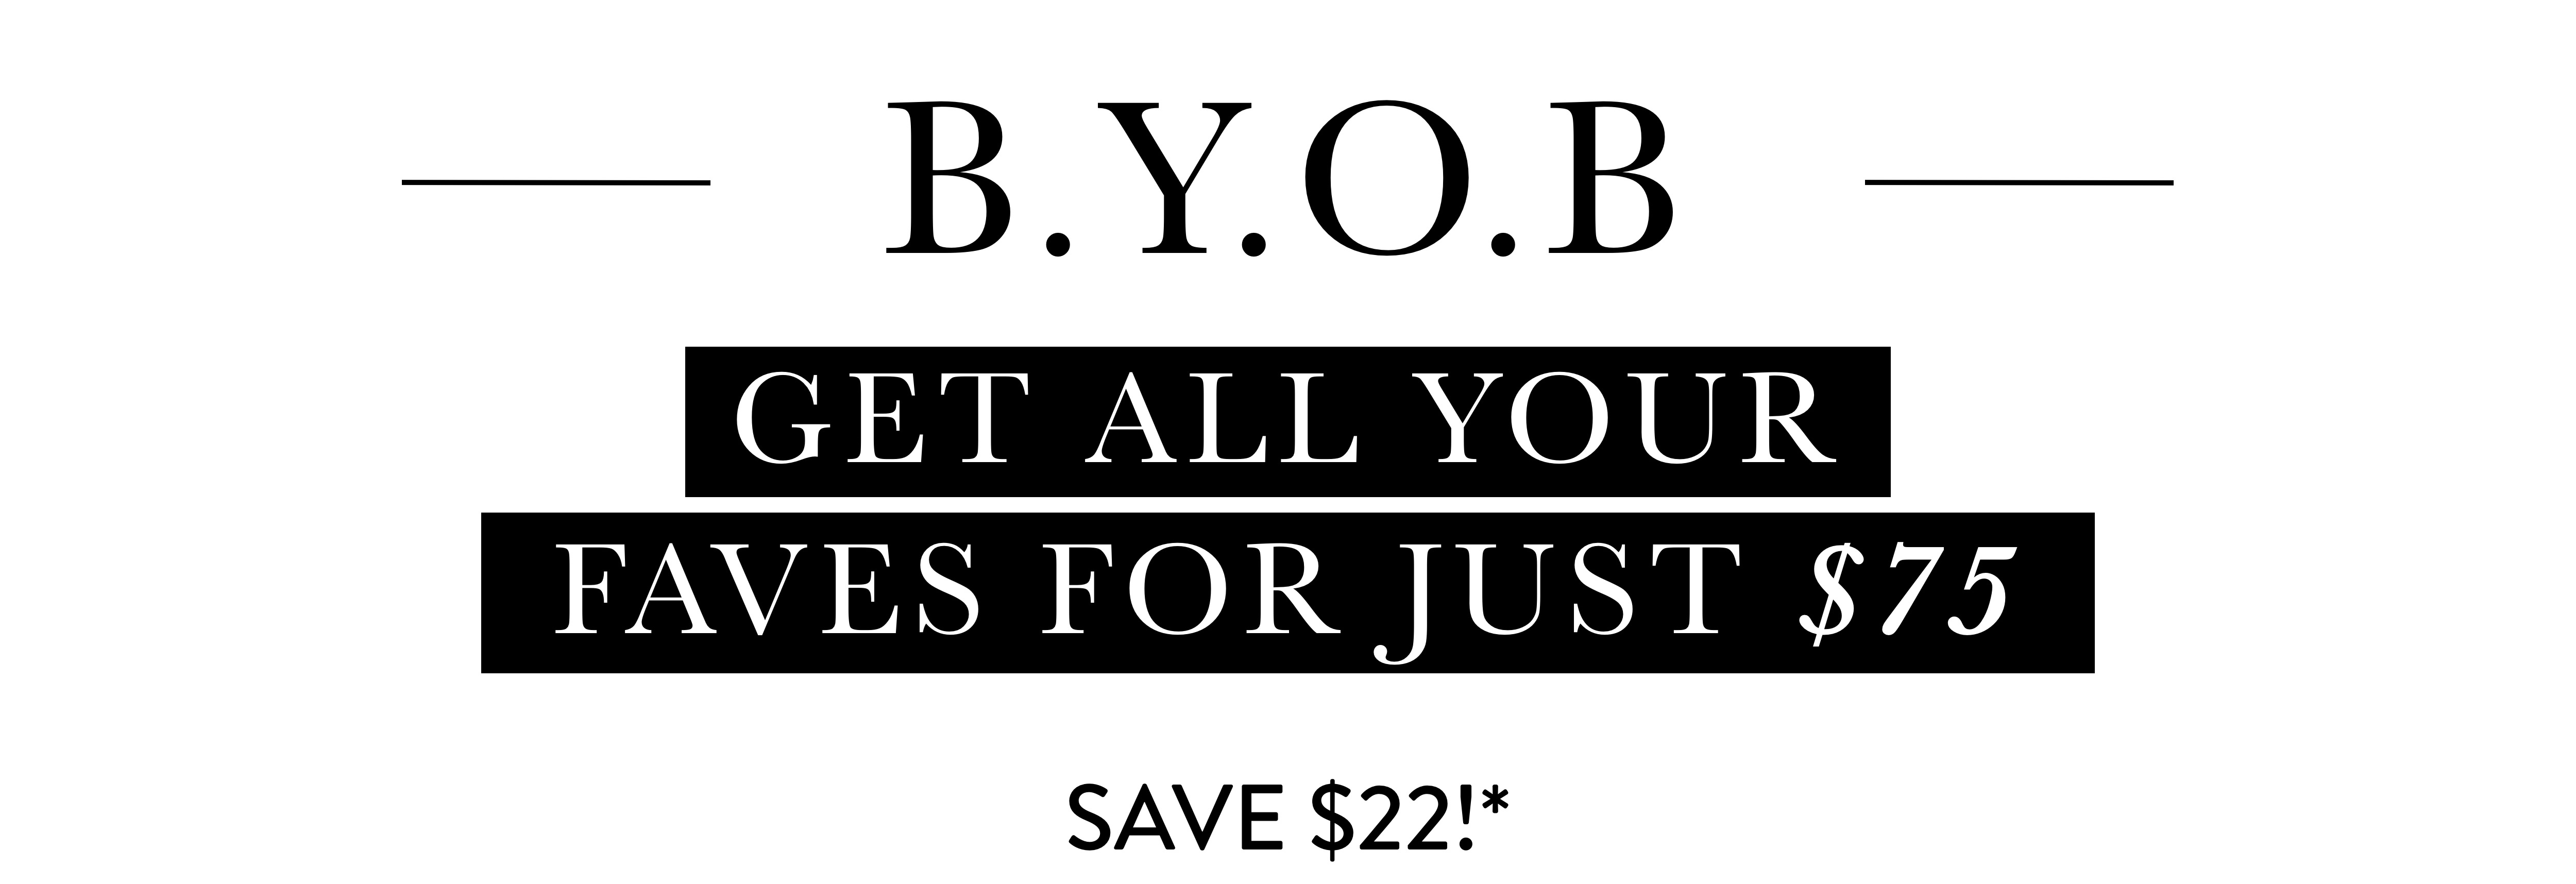 GET ALL YOUR FAVES FOR JUST $75 SAVE $22!*